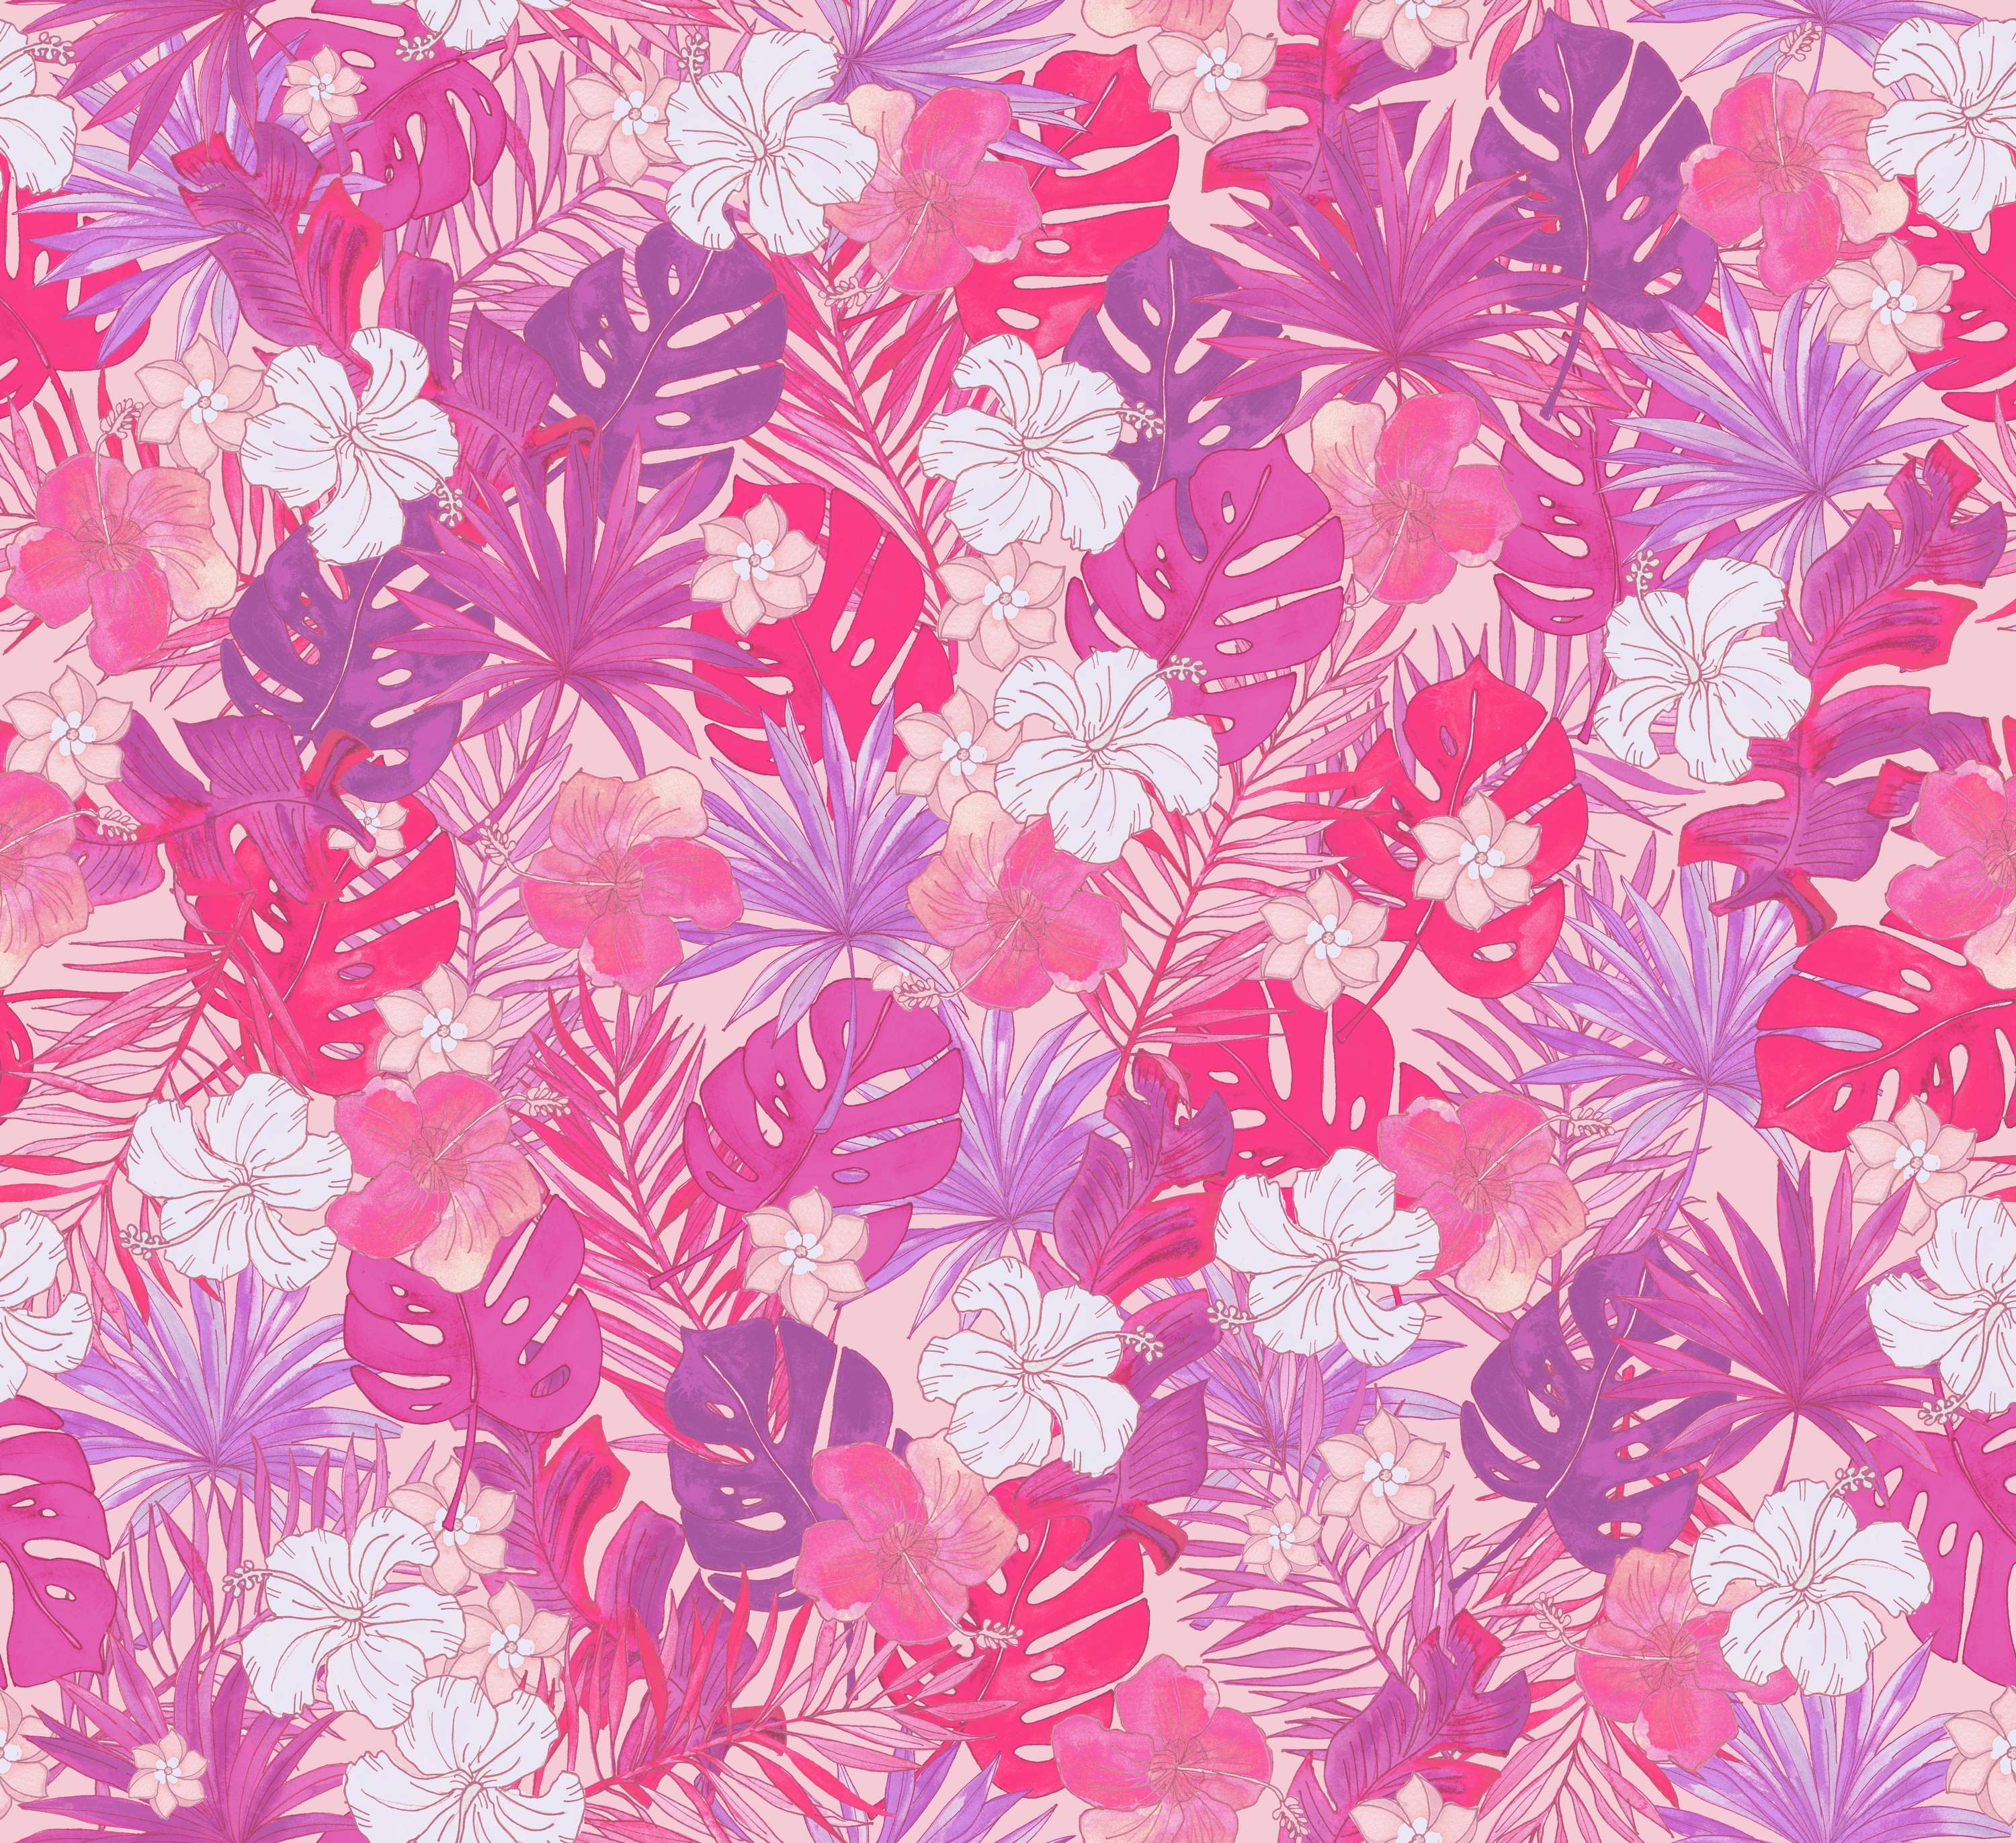 Tropical Fury (pink)-Wallpaper.com & photo wallpaper by renowned designers. Design your own photo wallpaper in our wallpaper online store. High quality design wallpaper, trend and luxury wallpaper for